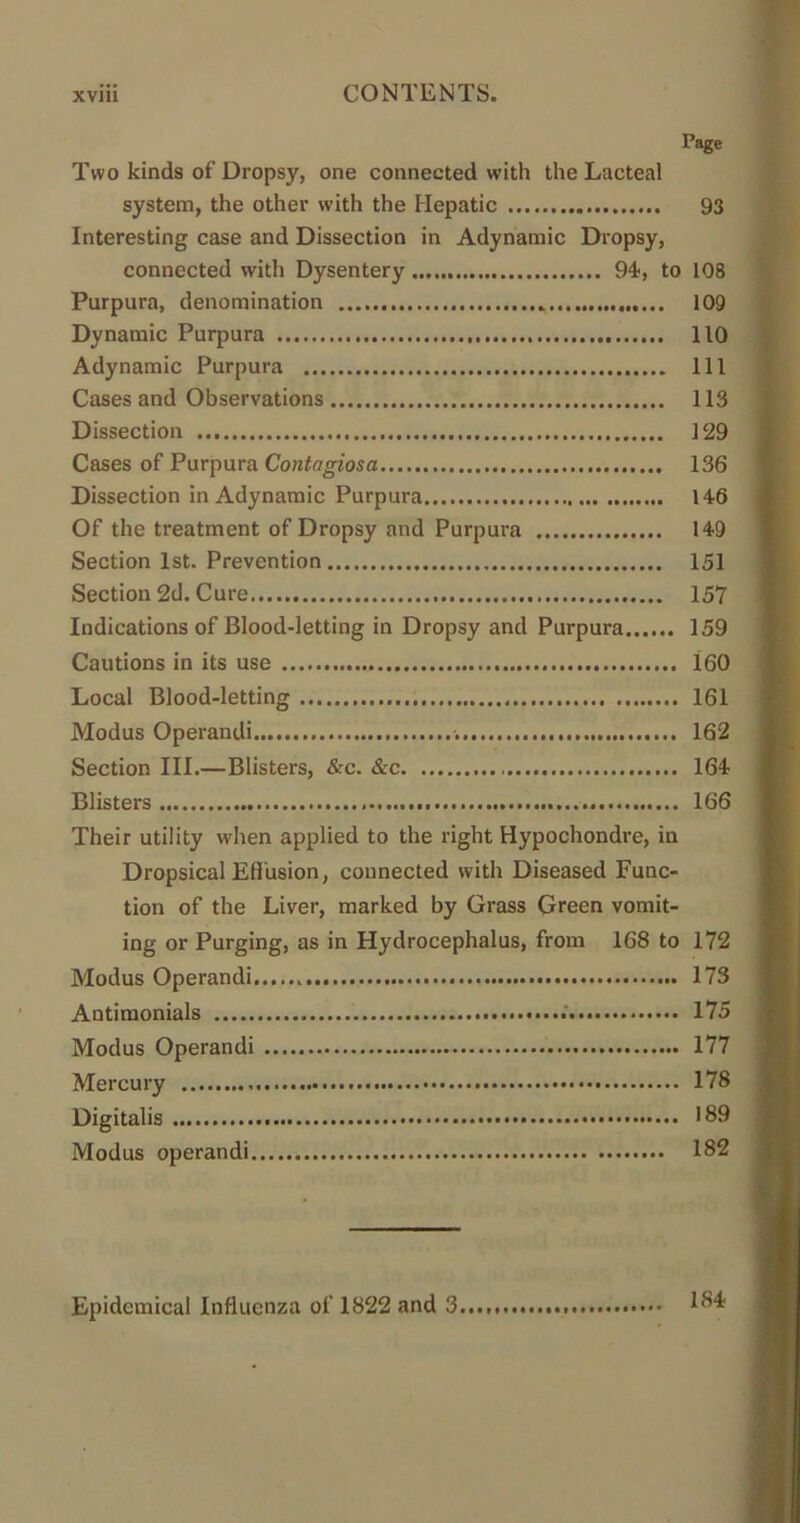 Page Two kinds of Dropsy, one connected with the Lacteal system, the other with the Hepatic 93 Interesting case and Dissection in Adynamic Dropsy, connected with Dysentery 94, to 108 Purpura, denomination 109 Dynamic Purpura 110 Adynamic Purpura Ill Cases and Observations 113 Dissection 129 Cases of Purpura Contagiosa 136 Dissection in Adynamic Purpura 146 Of the treatment of Dropsy and Purpura 149 Section 1st. Prevention 151 Section 2d. Cure 157 Indications of Blood-letting in Dropsy and Purpura 159 Cautions in its use 160 Local Blood-letting 161 Modus Operandi 162 Section III.—Blisters, &c. &c 164 Blisters 166 Their utility when applied to the right Hypochondre, in Dropsical Effusion, connected with Diseased Func- tion of the Liver, marked by Grass Green vomit- ing or Purging, as in Hydrocephalus, from 168 to 172 Modus Operandi 173 Antimonials 175 Modus Operandi 177 Mercury 178 Digitalis 189 Modus operandi 182 Epidemical Influenza of 1822 and 3..., 1®^